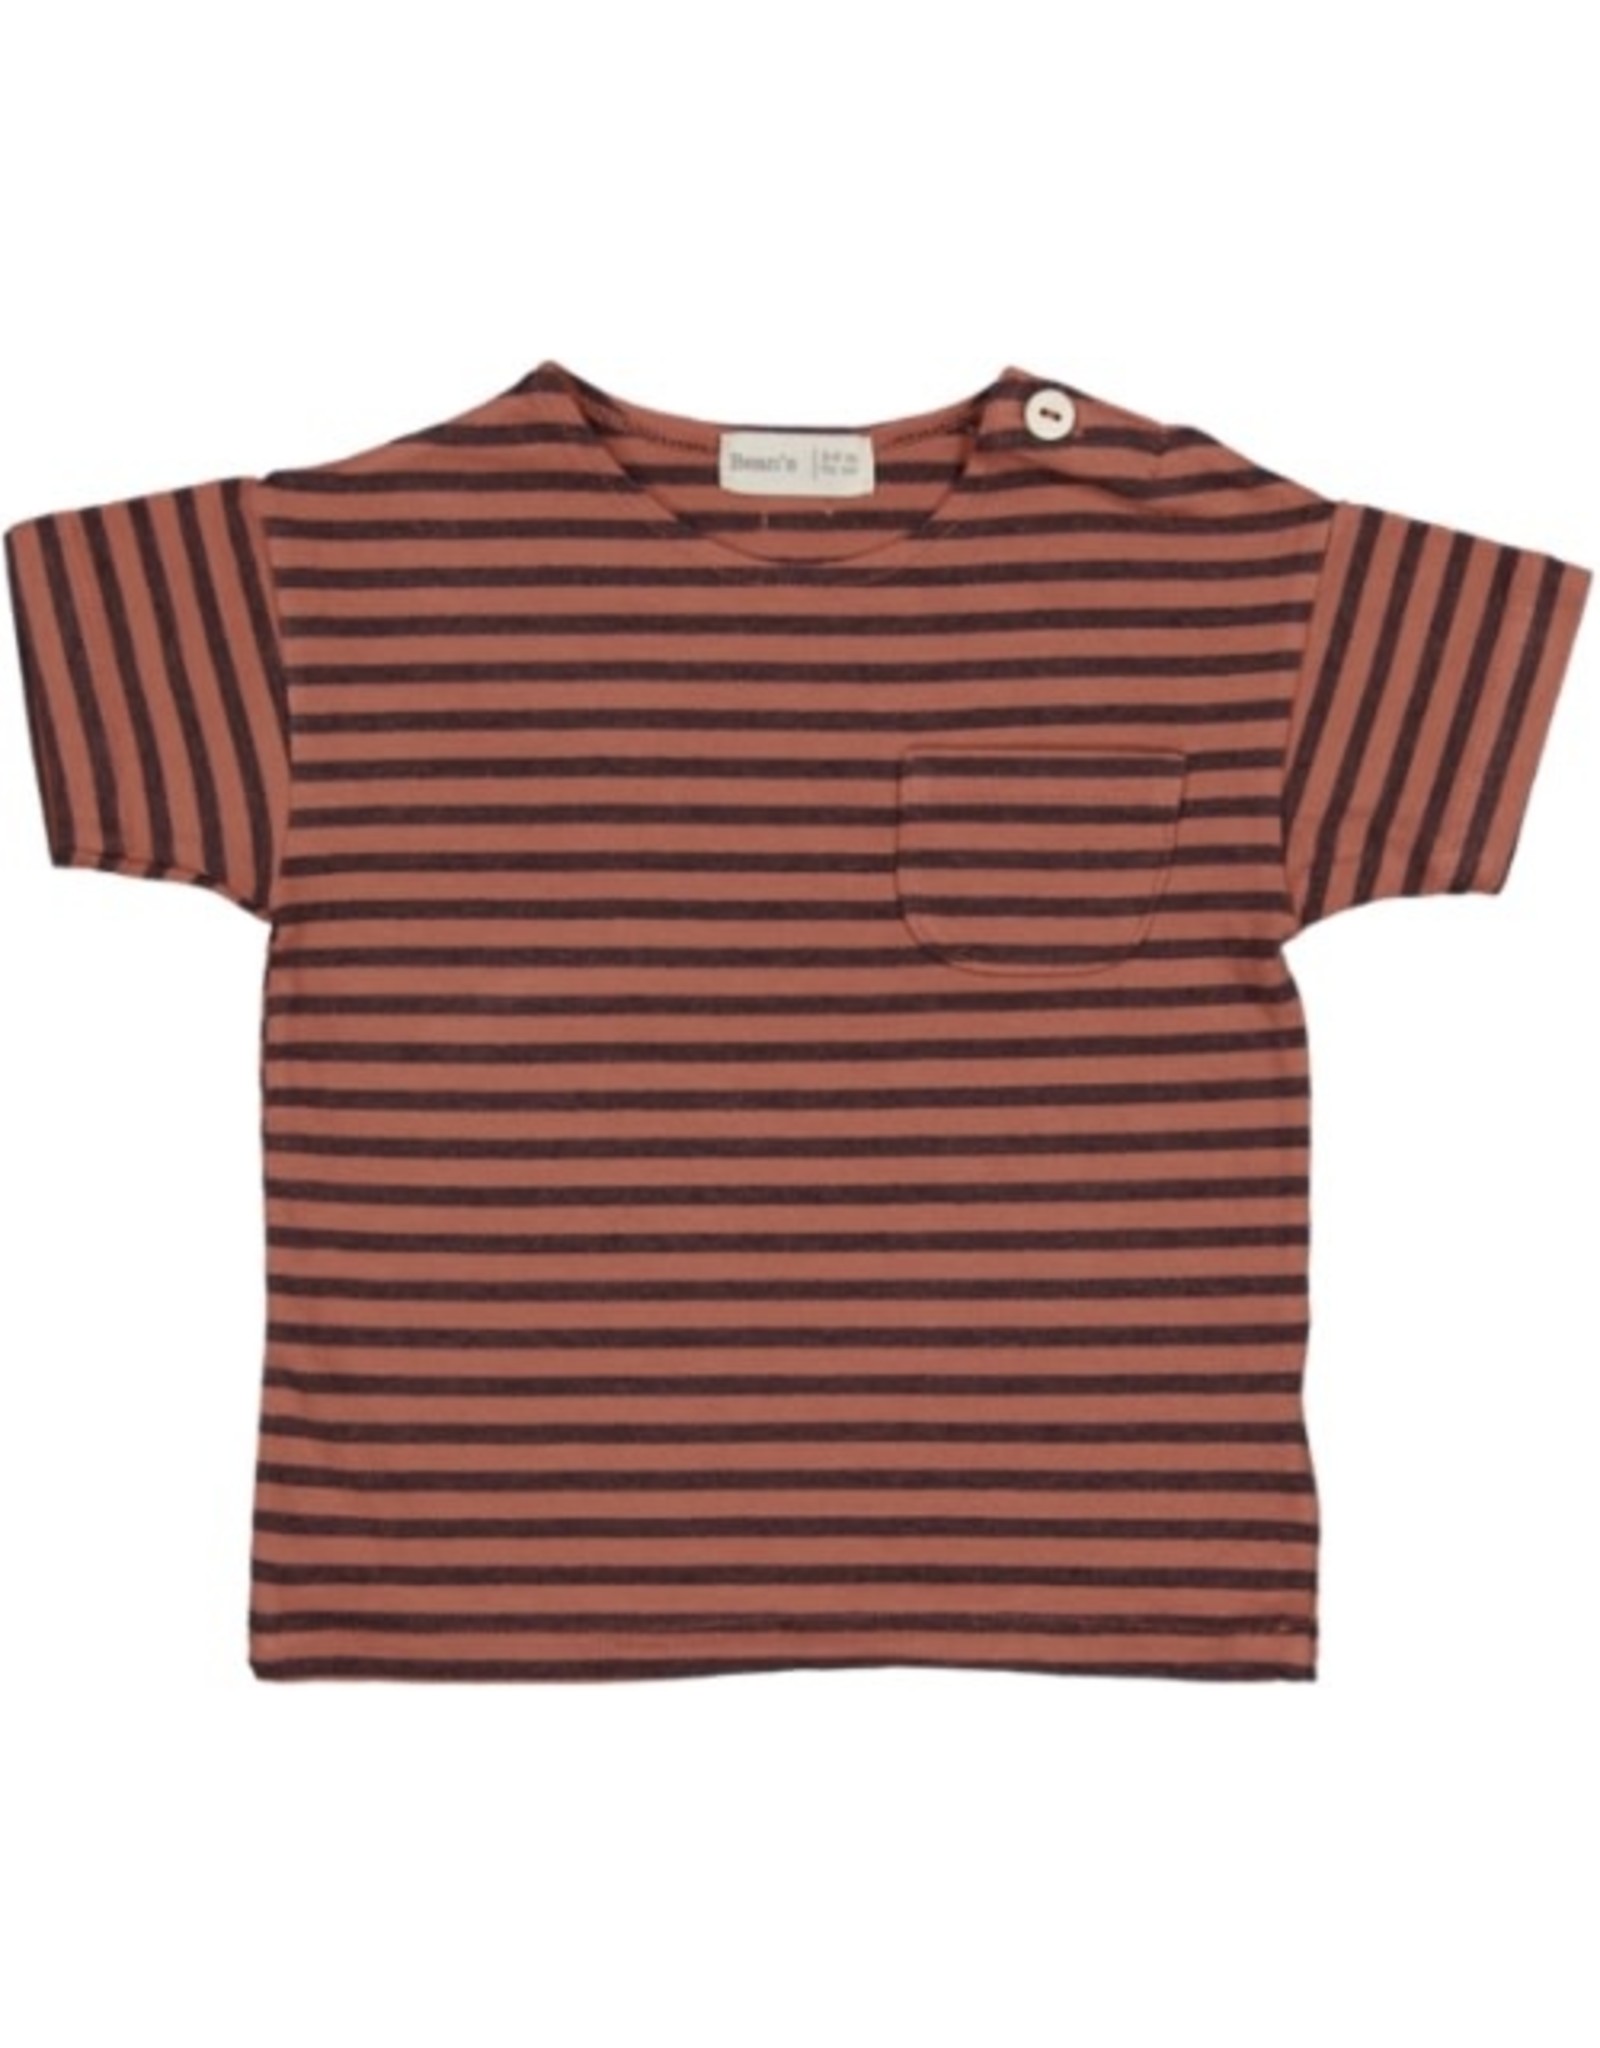 Beans Barcelona Bean's Barcelona - PINEAPPLE- Striped Cotton T-shirt with pocket - Clay